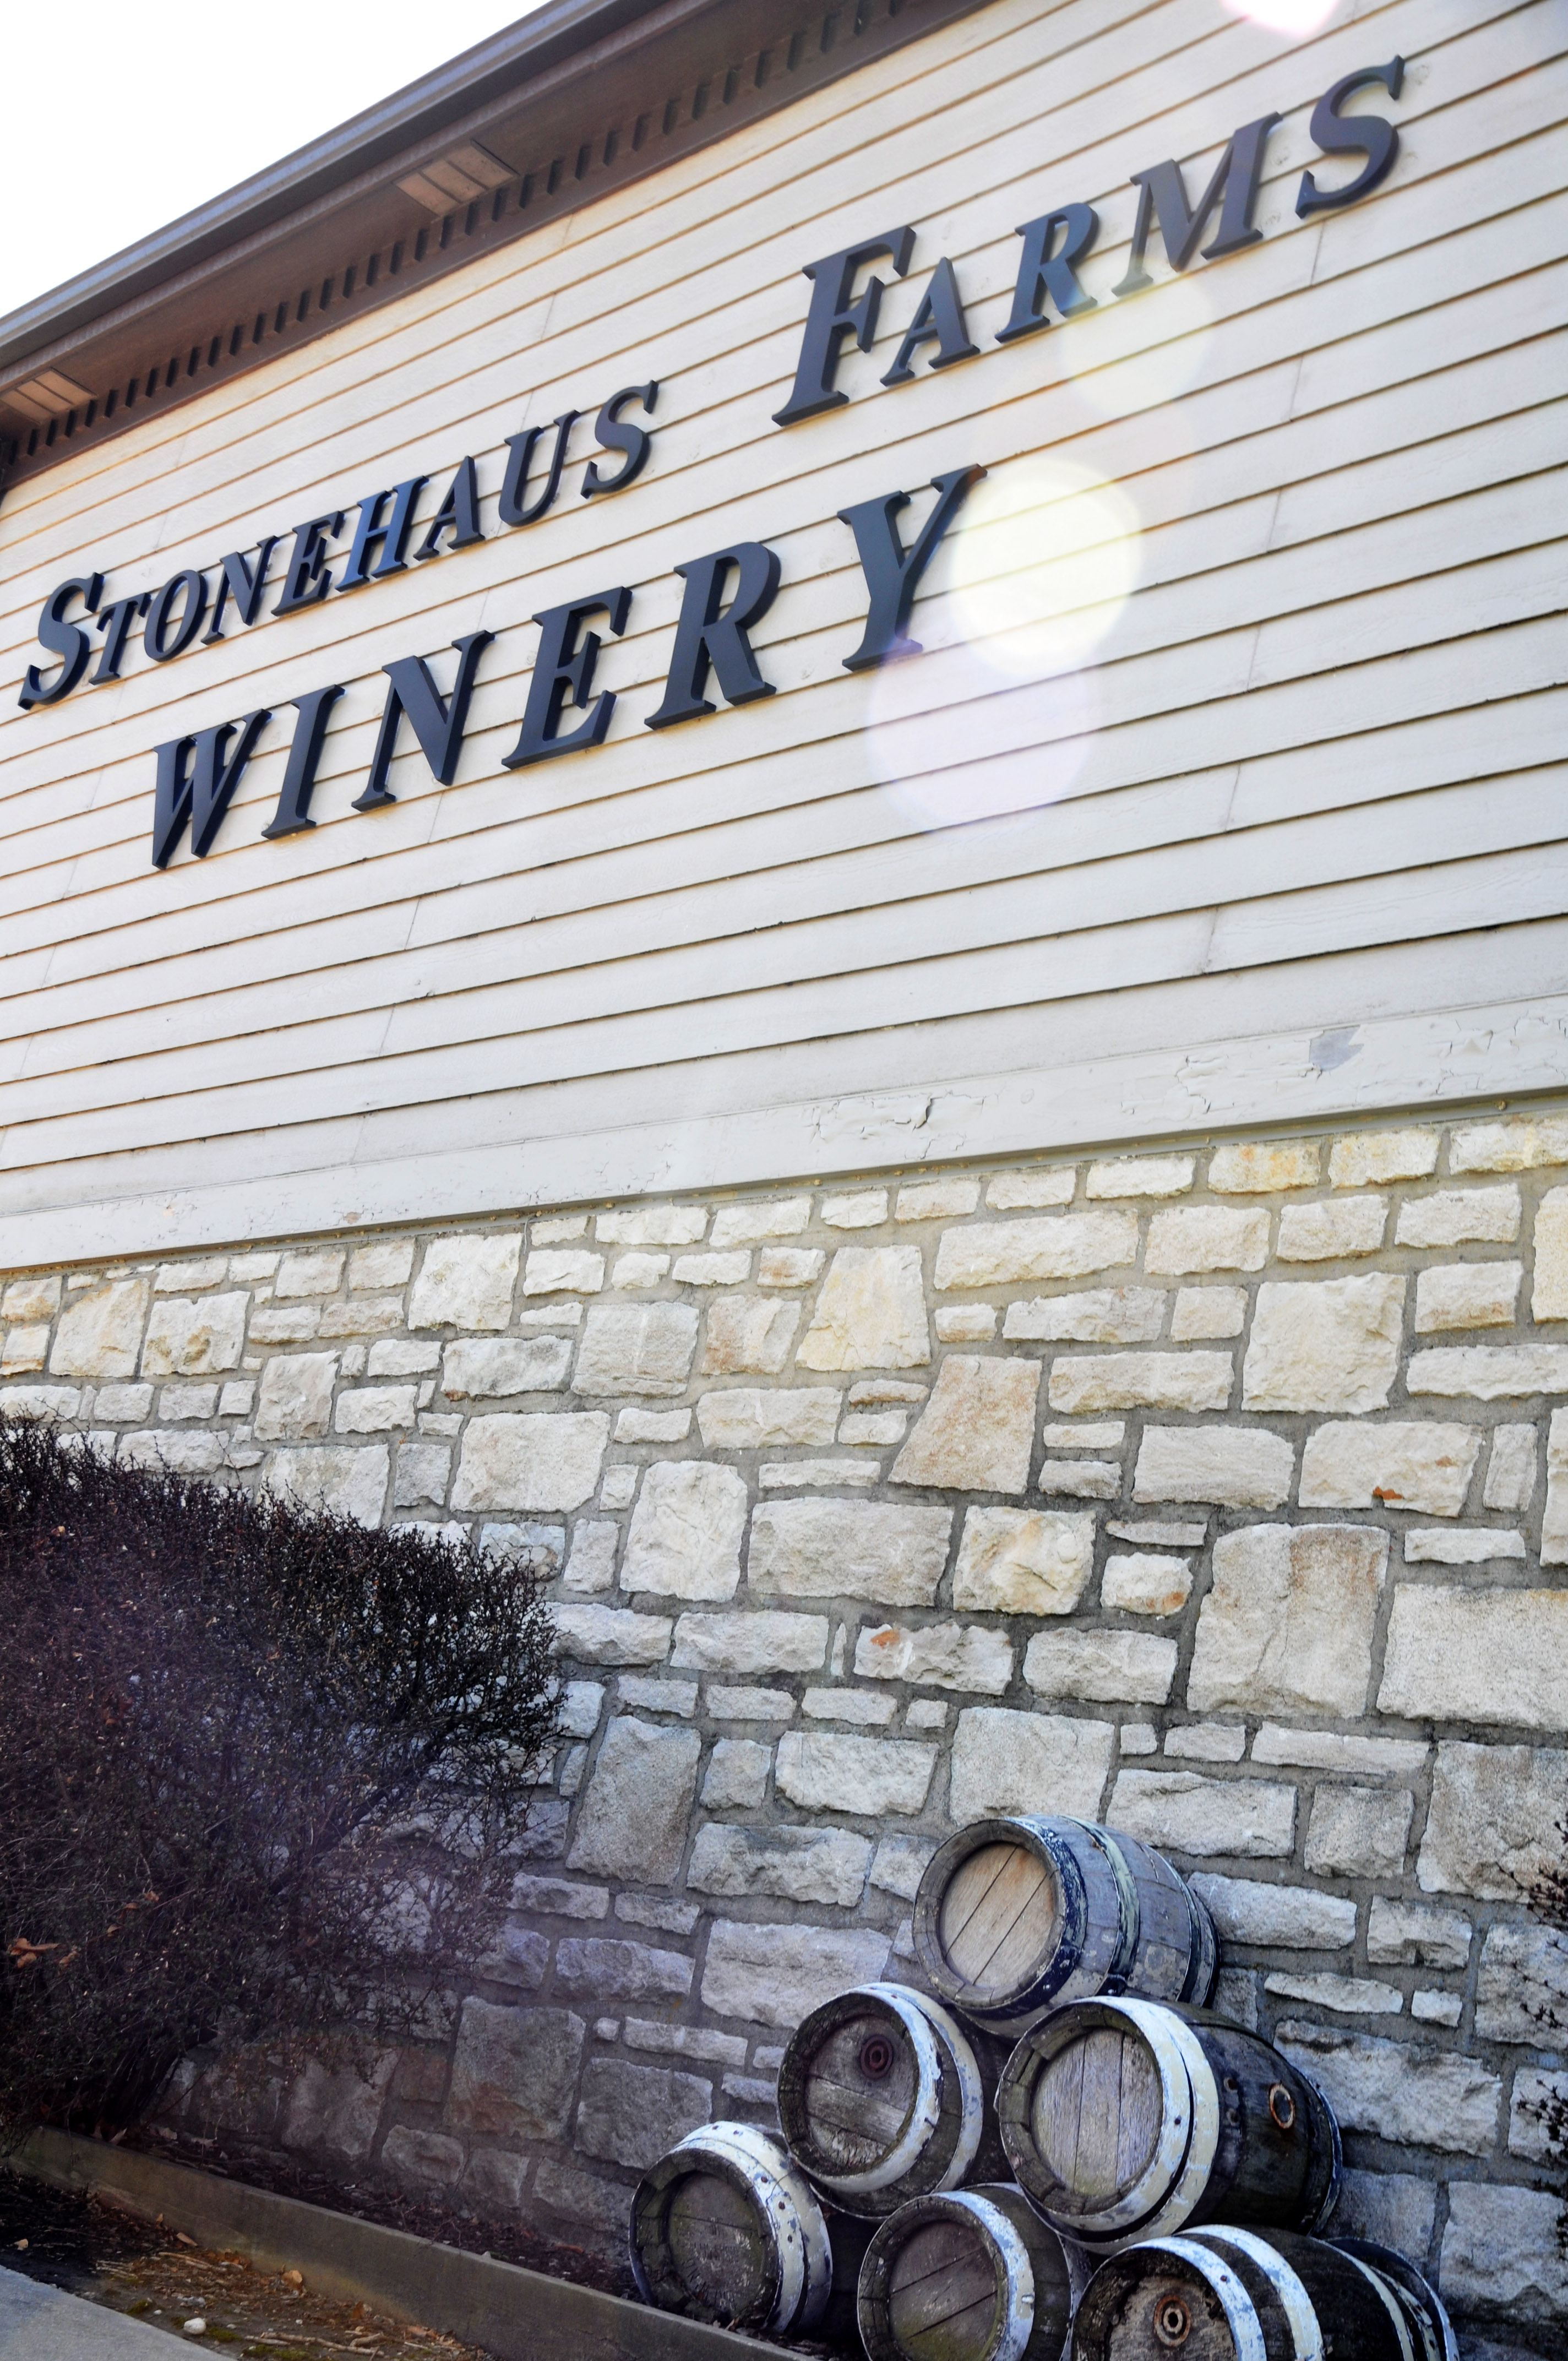 Stonehaus Farms Vineyard & Winery - outdoor photo, of a large building of stone and siding, with the winery's logo on the side. Wine barrels are in the foreground.